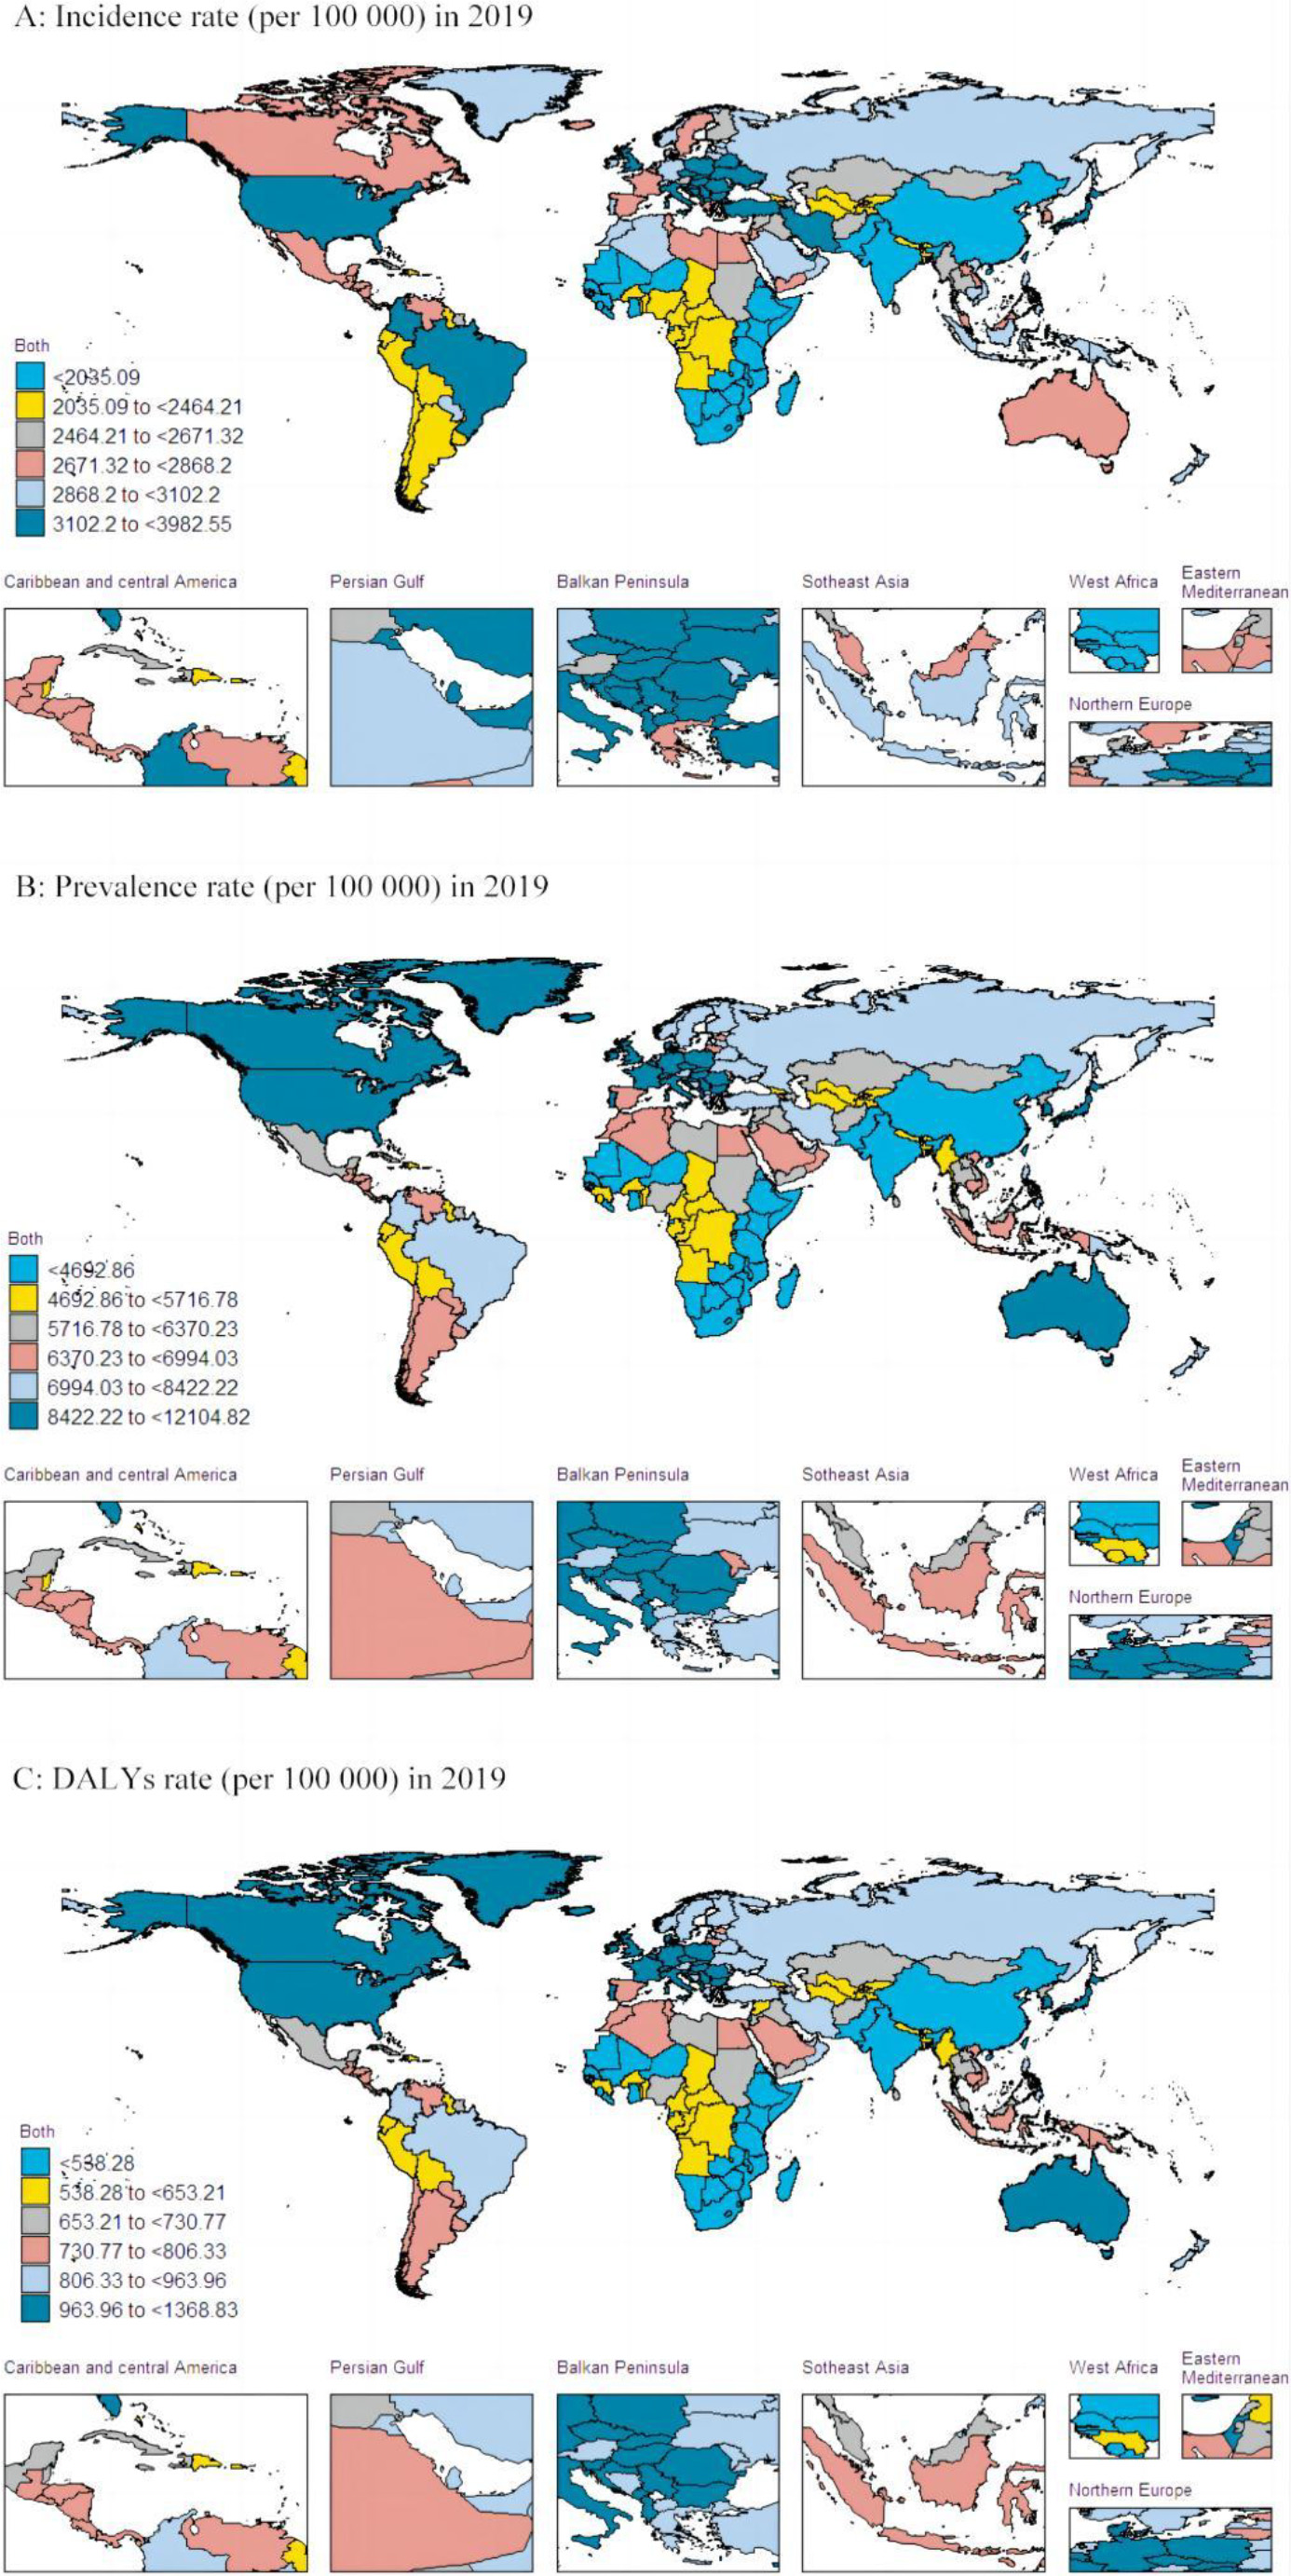 Incidence rates, prevalence rates and DALYs rates of low back pain by country in 2019.